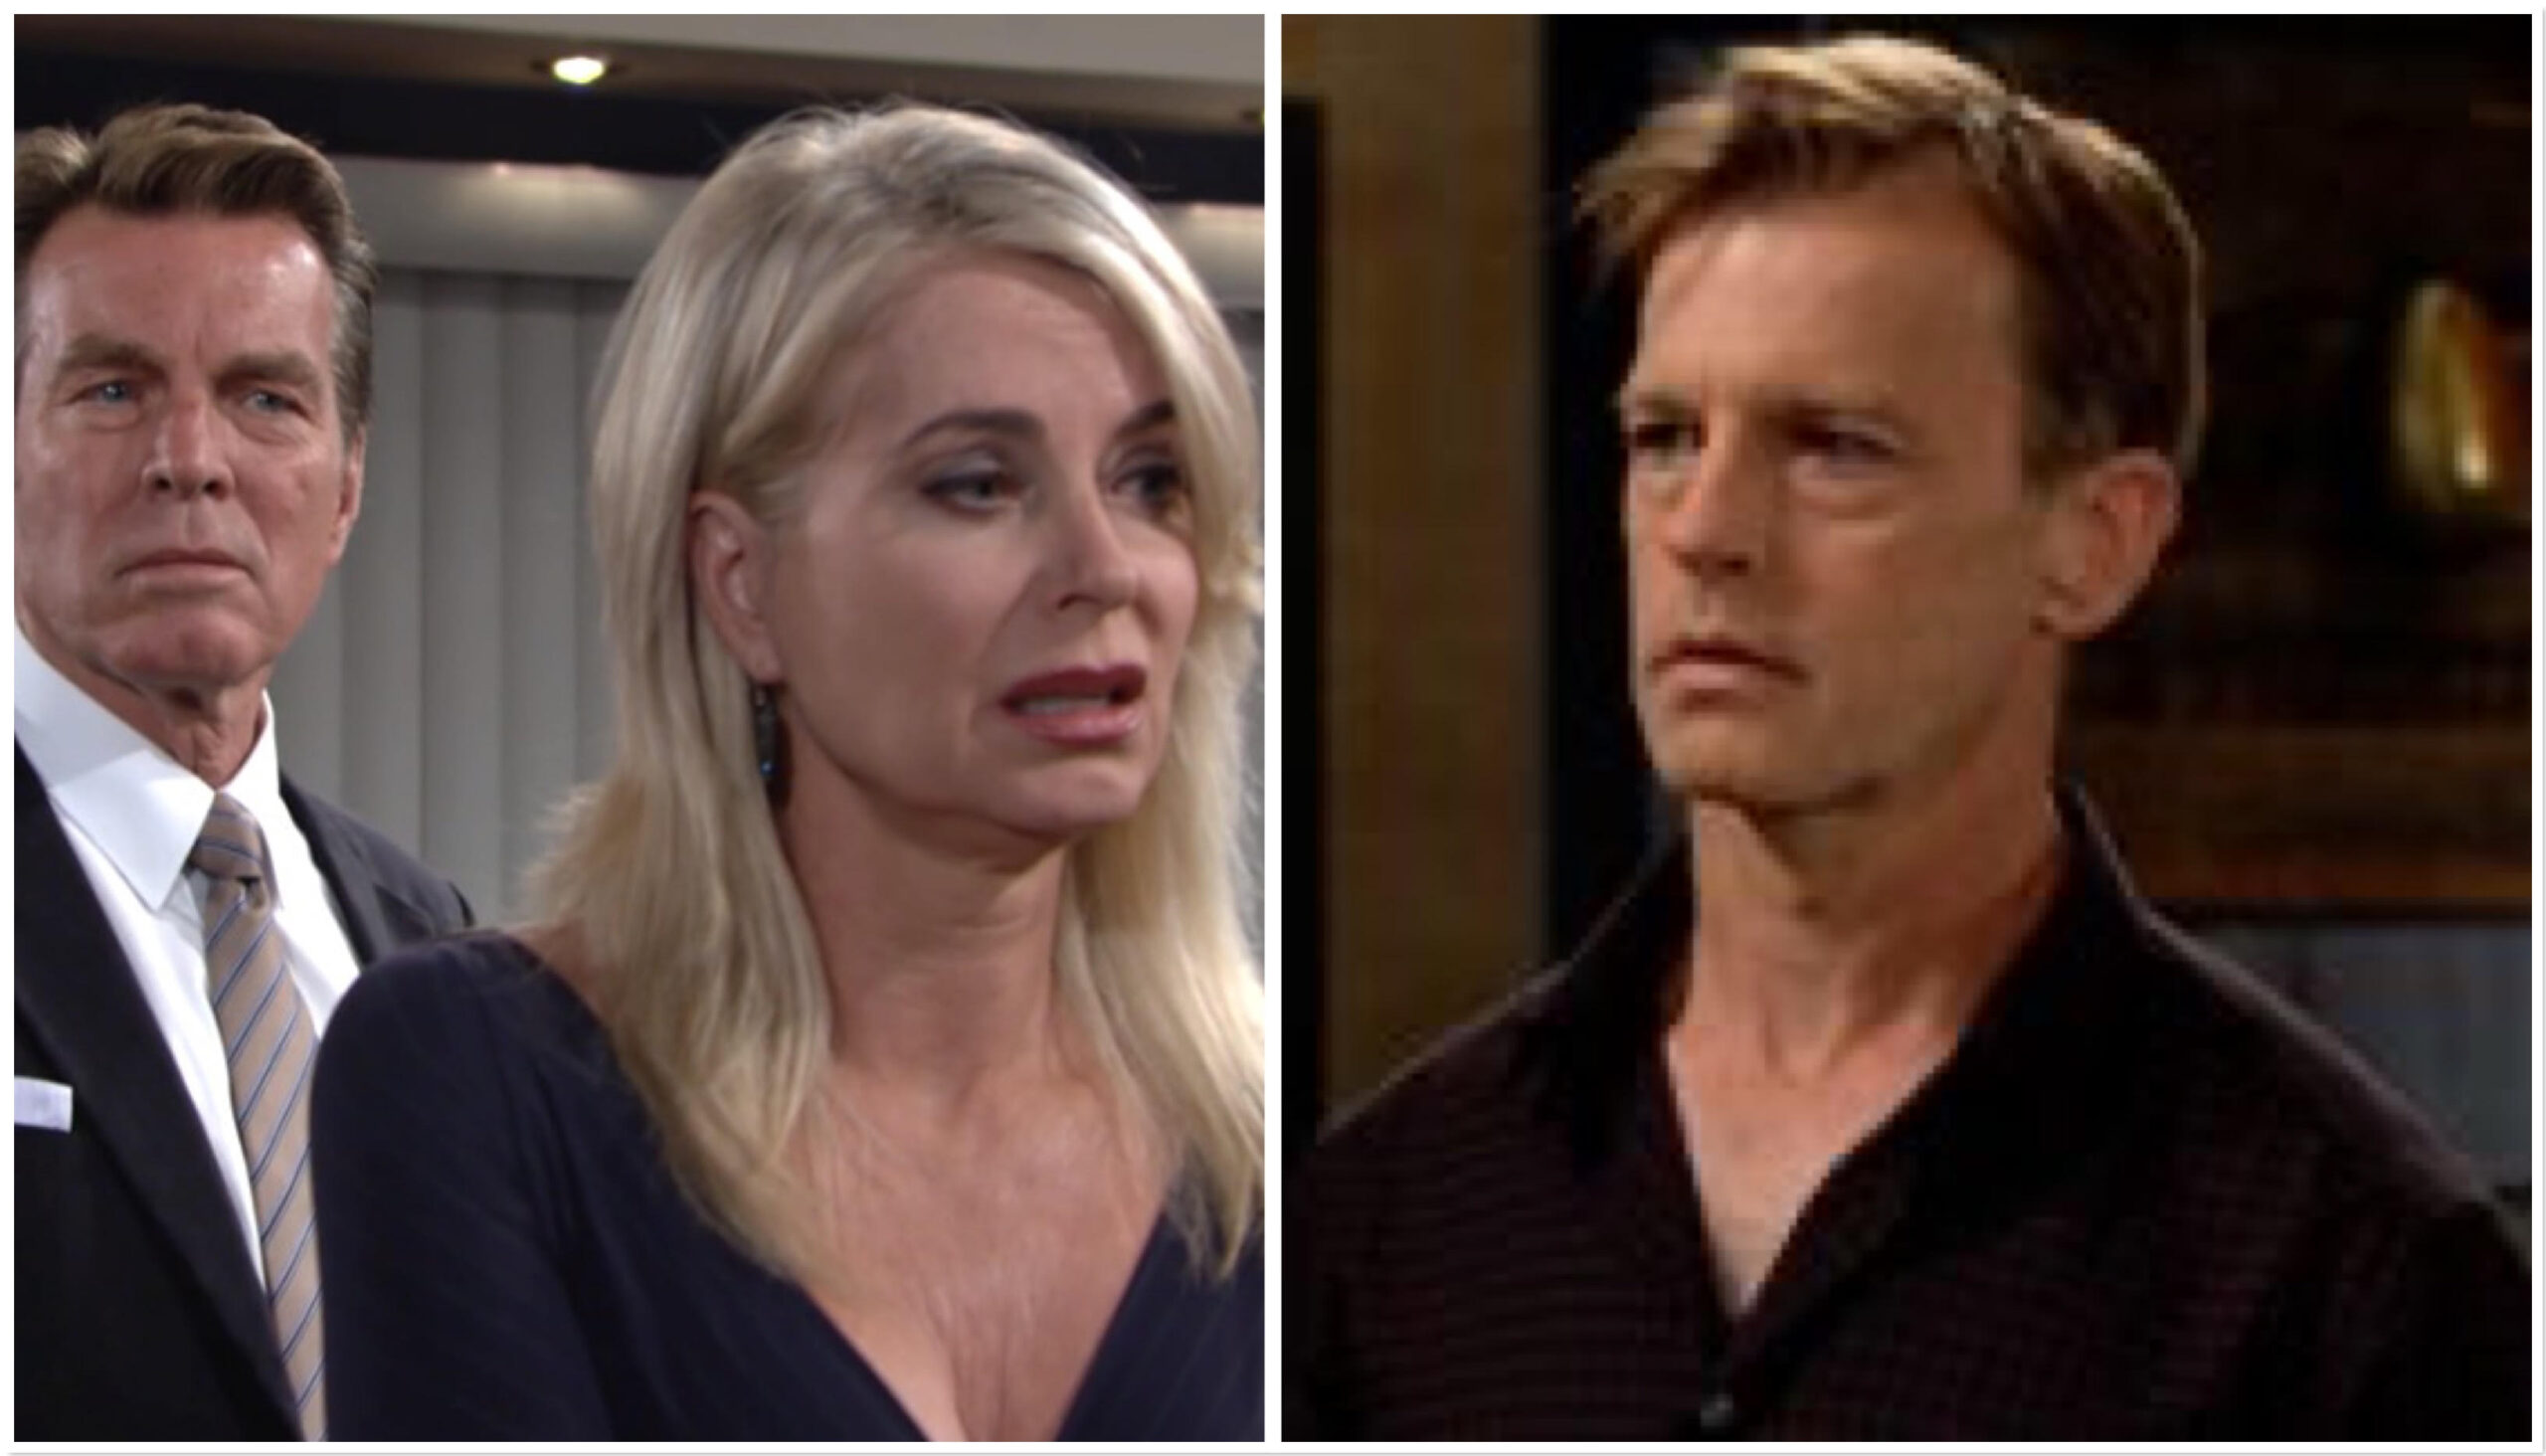 The Young and the Restless Spoilers Ashley Abbotts Dilemma featuring Jack Abbott Ashley Abbott Tucker McCall